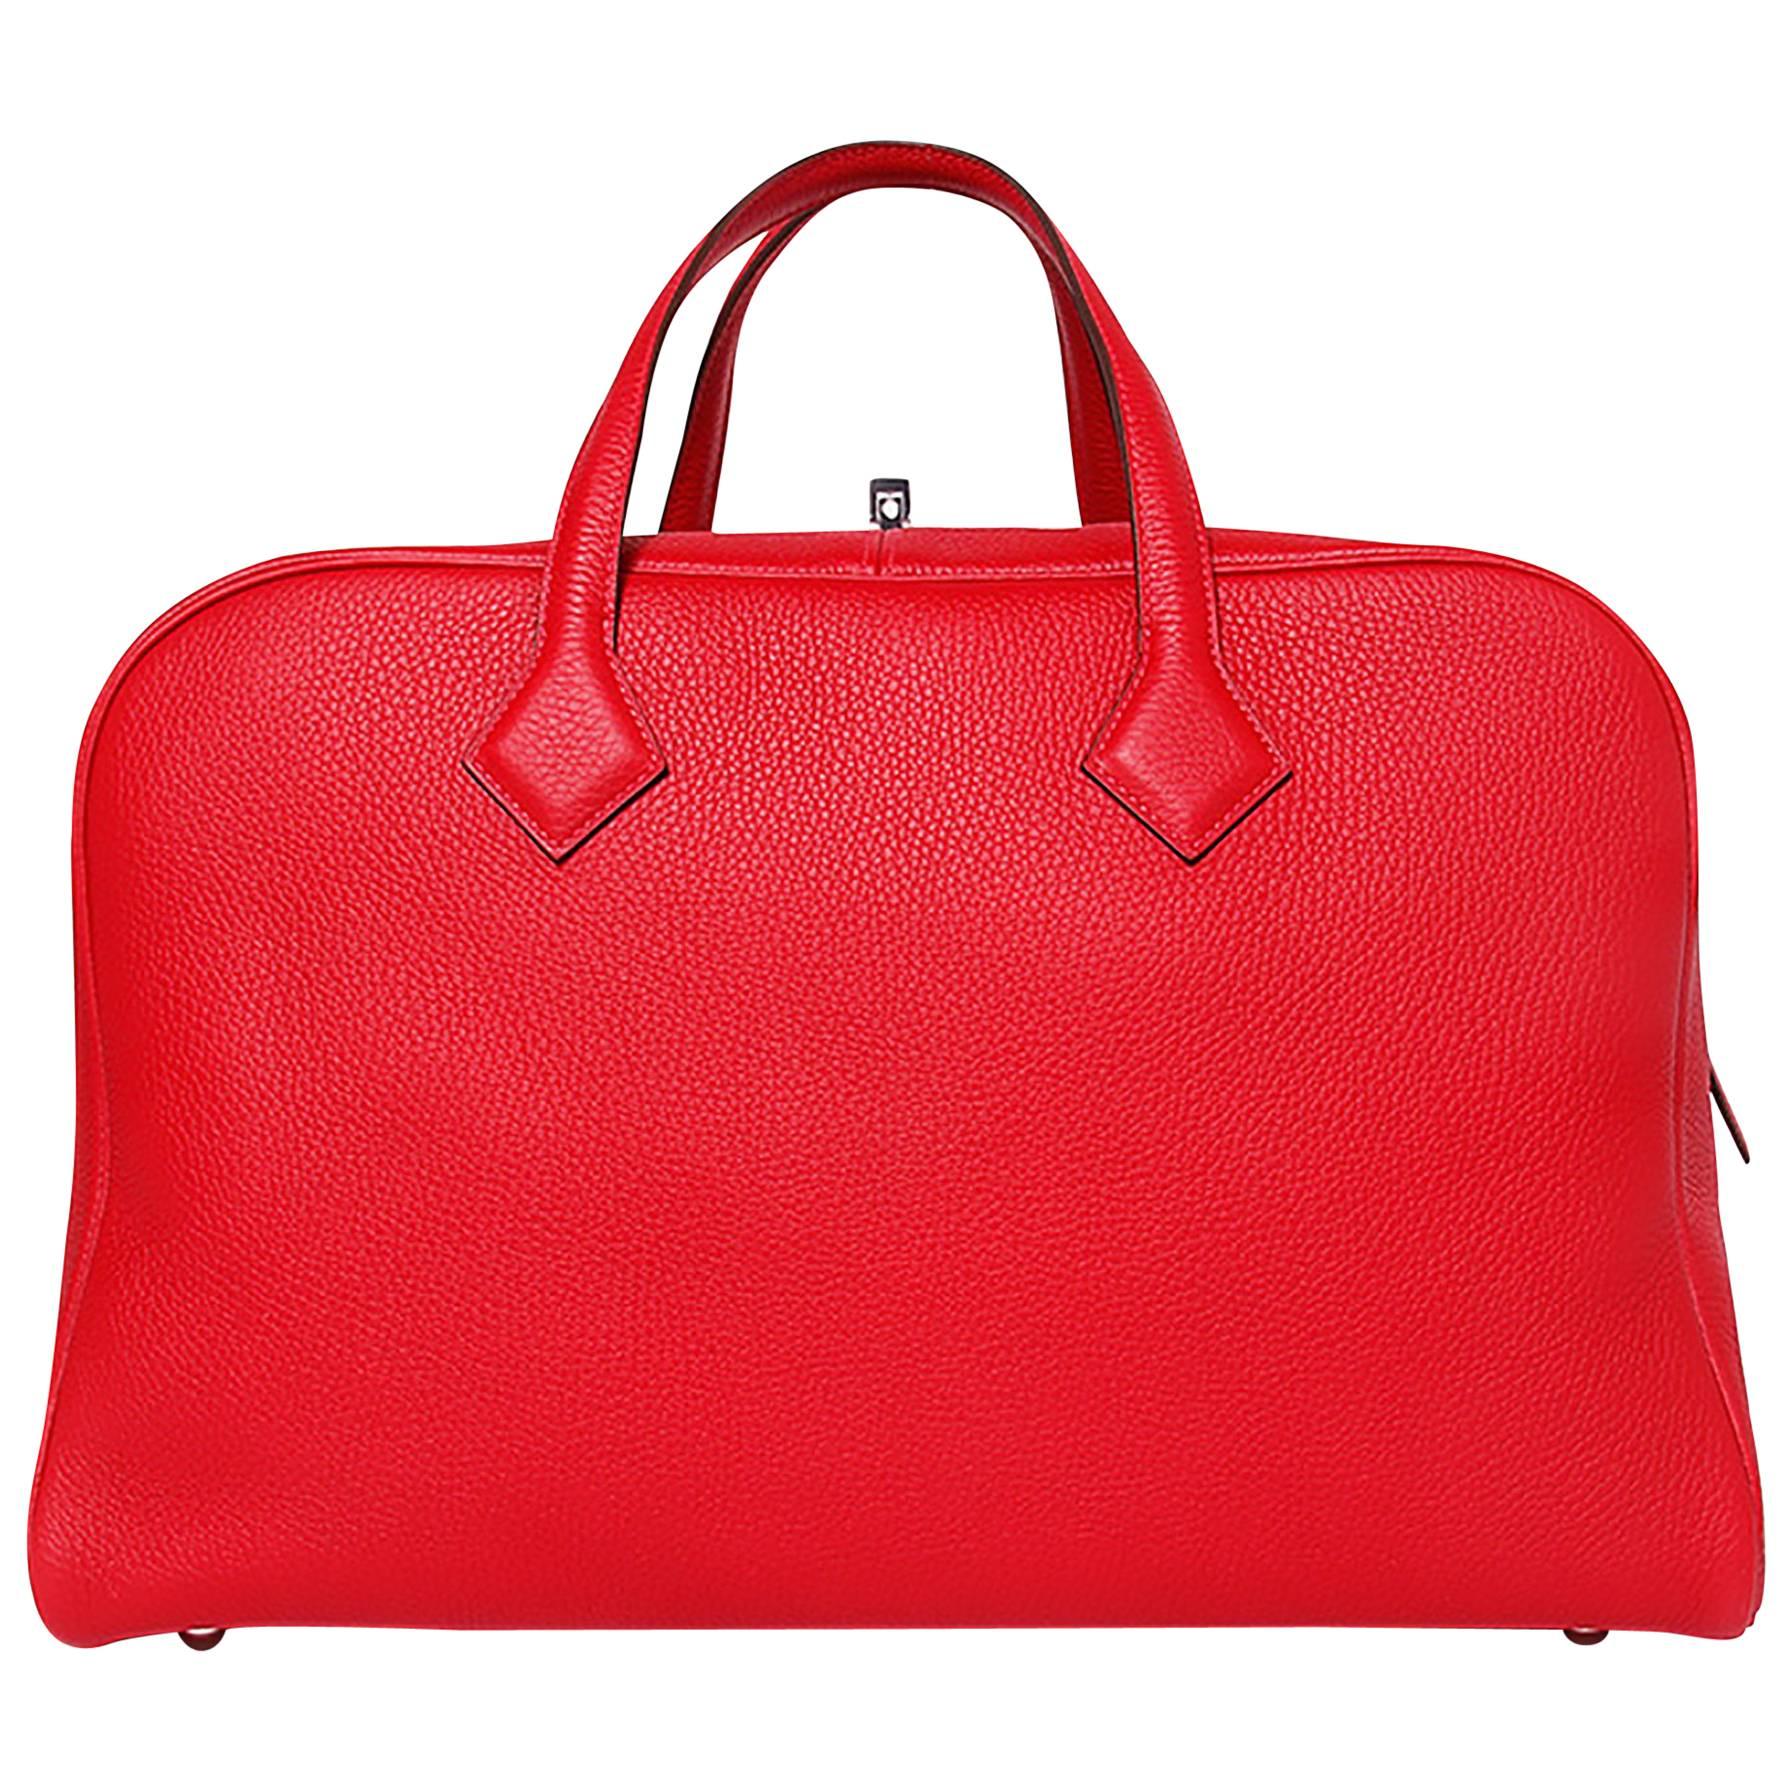 Hermes Tote Bag Victoria II 43 T. Clemence Leather Red Color PHW